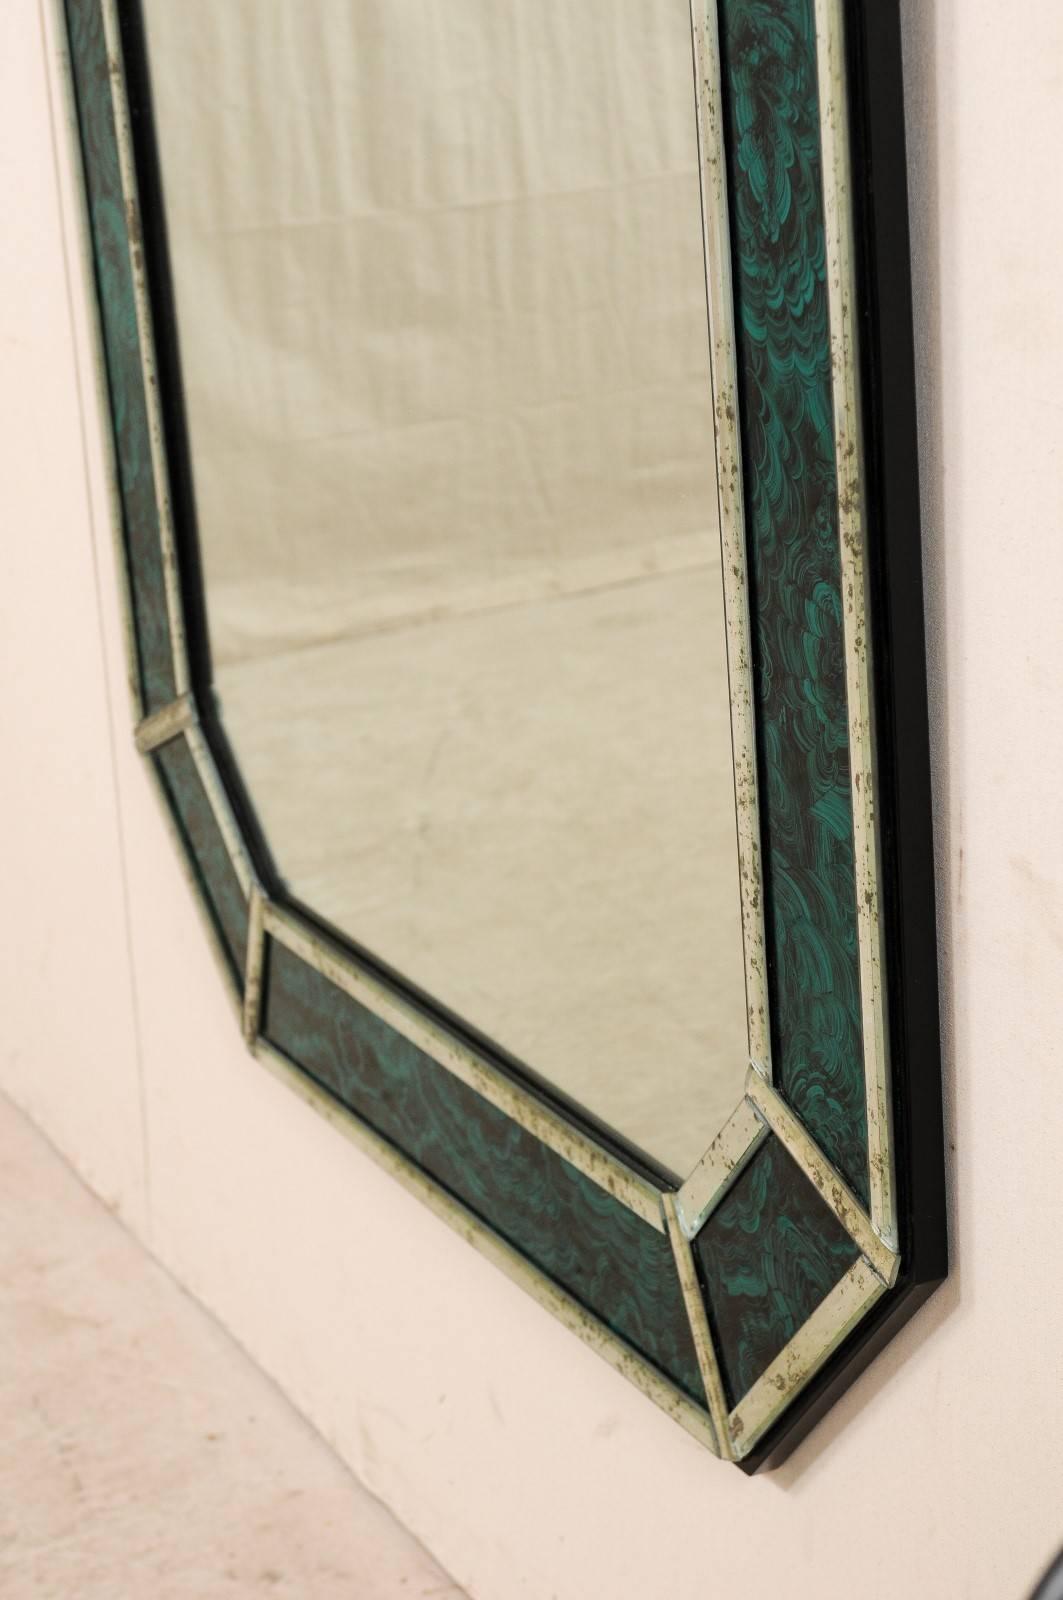 Contemporary Large Size Deep Green and Teal Colored Malachite Wall Mirror with Antiqued Glass